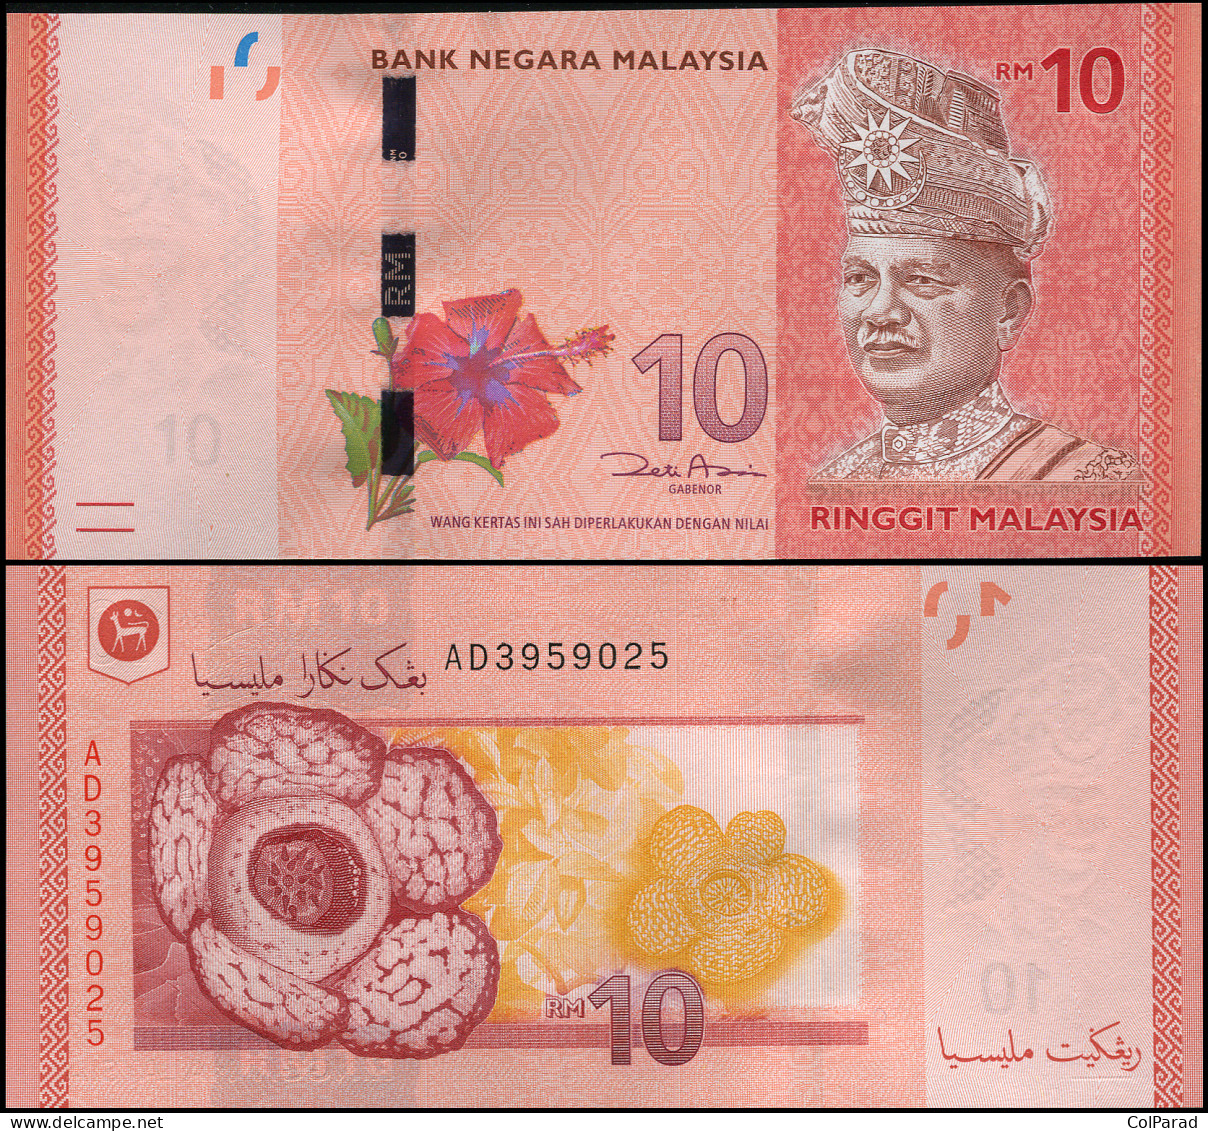 MALAYSIA 10 RINGGIT - ND (2012) - Paper Unc - P.53a Banknote - Malesia